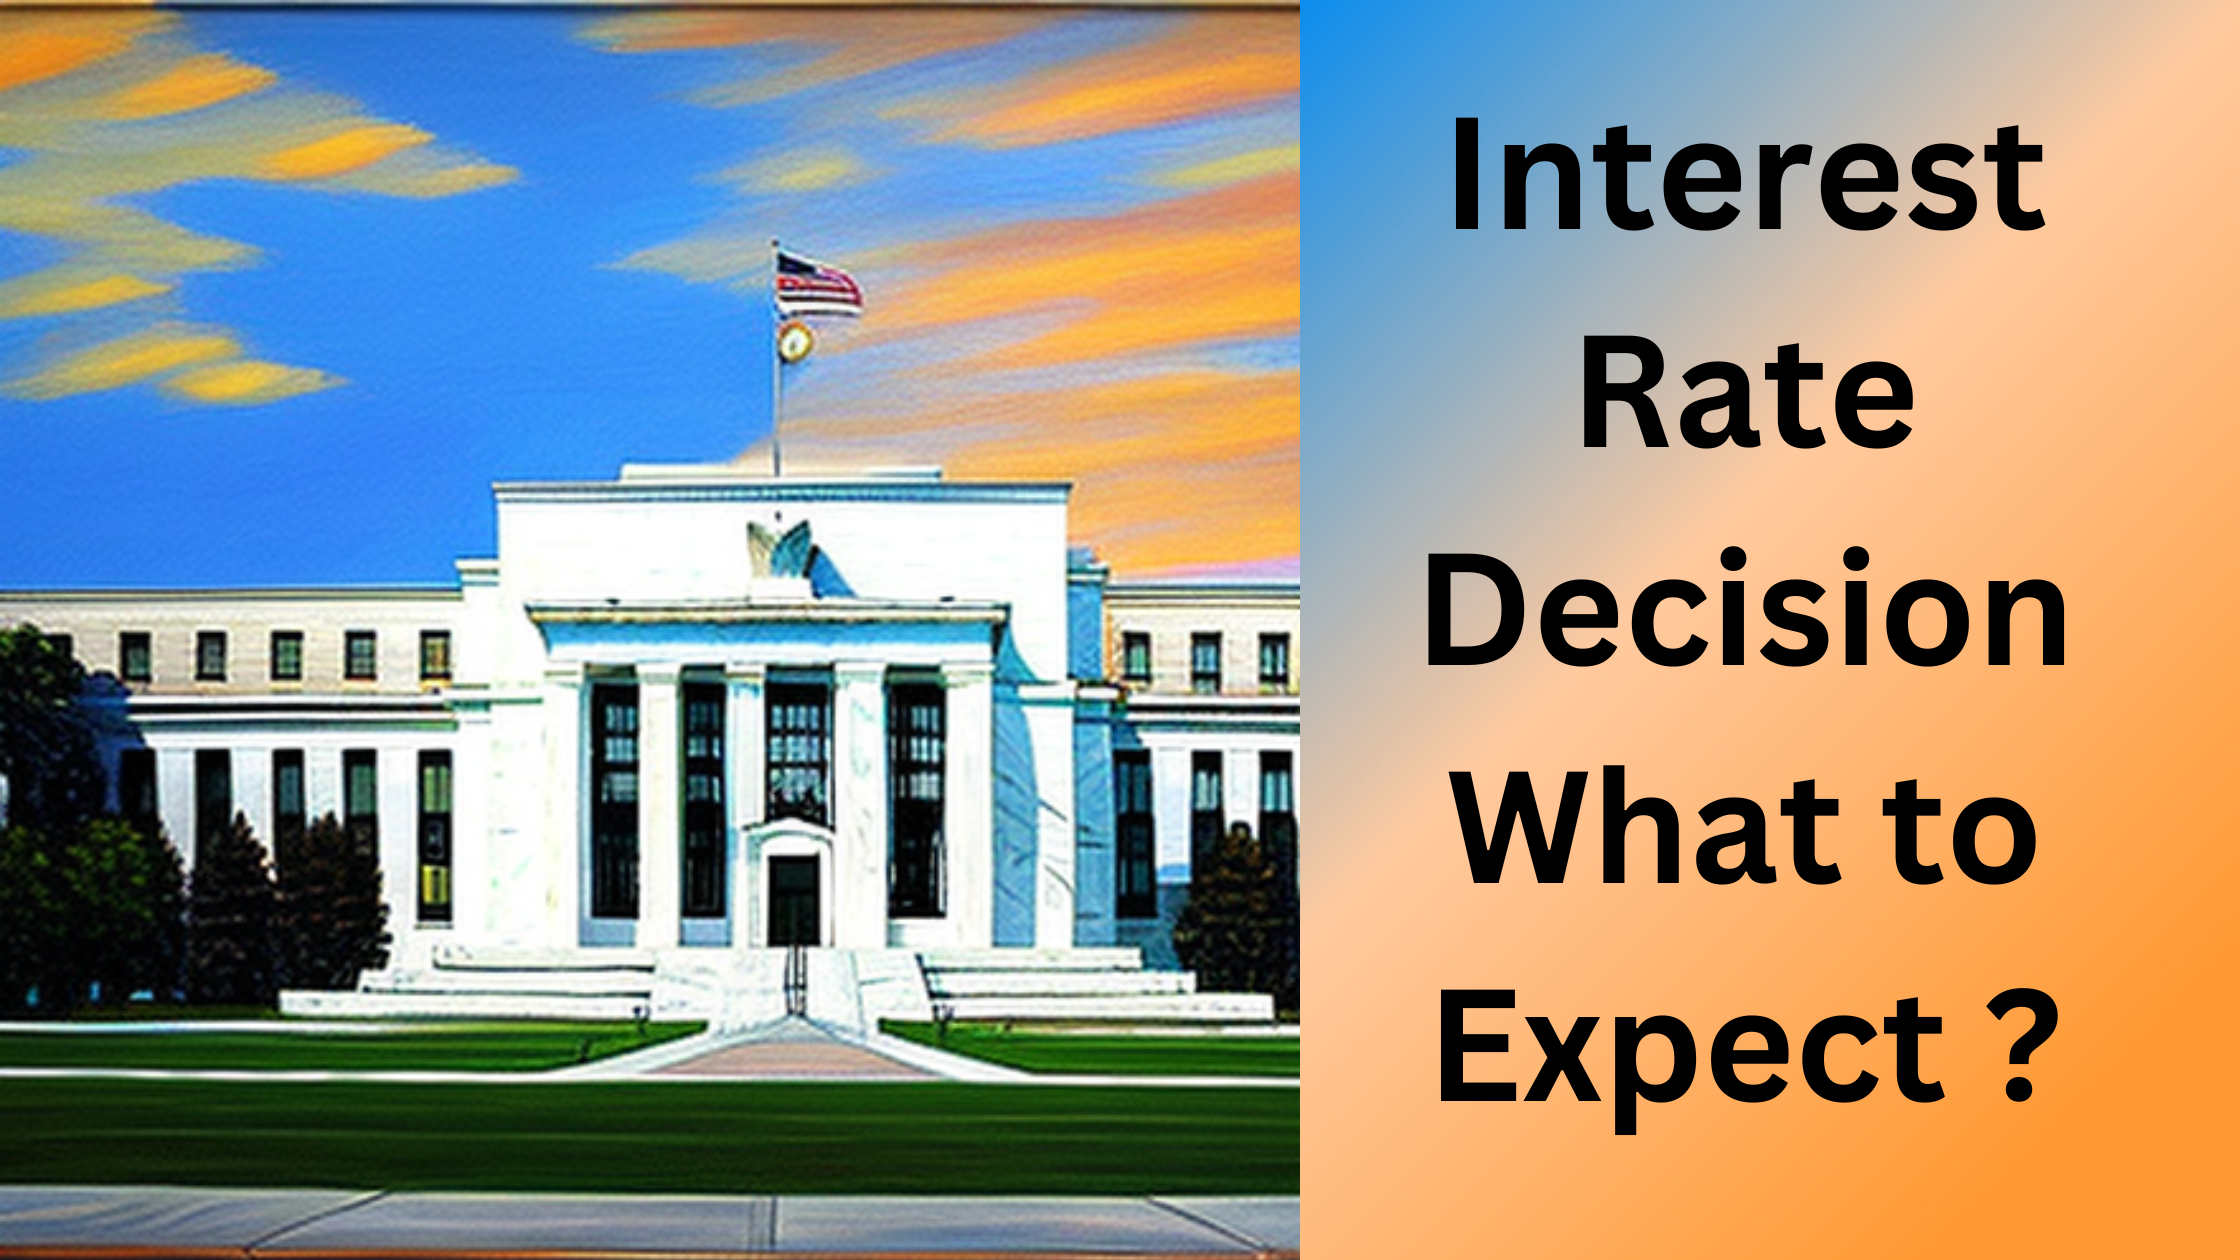 Interest Rate Decision What to